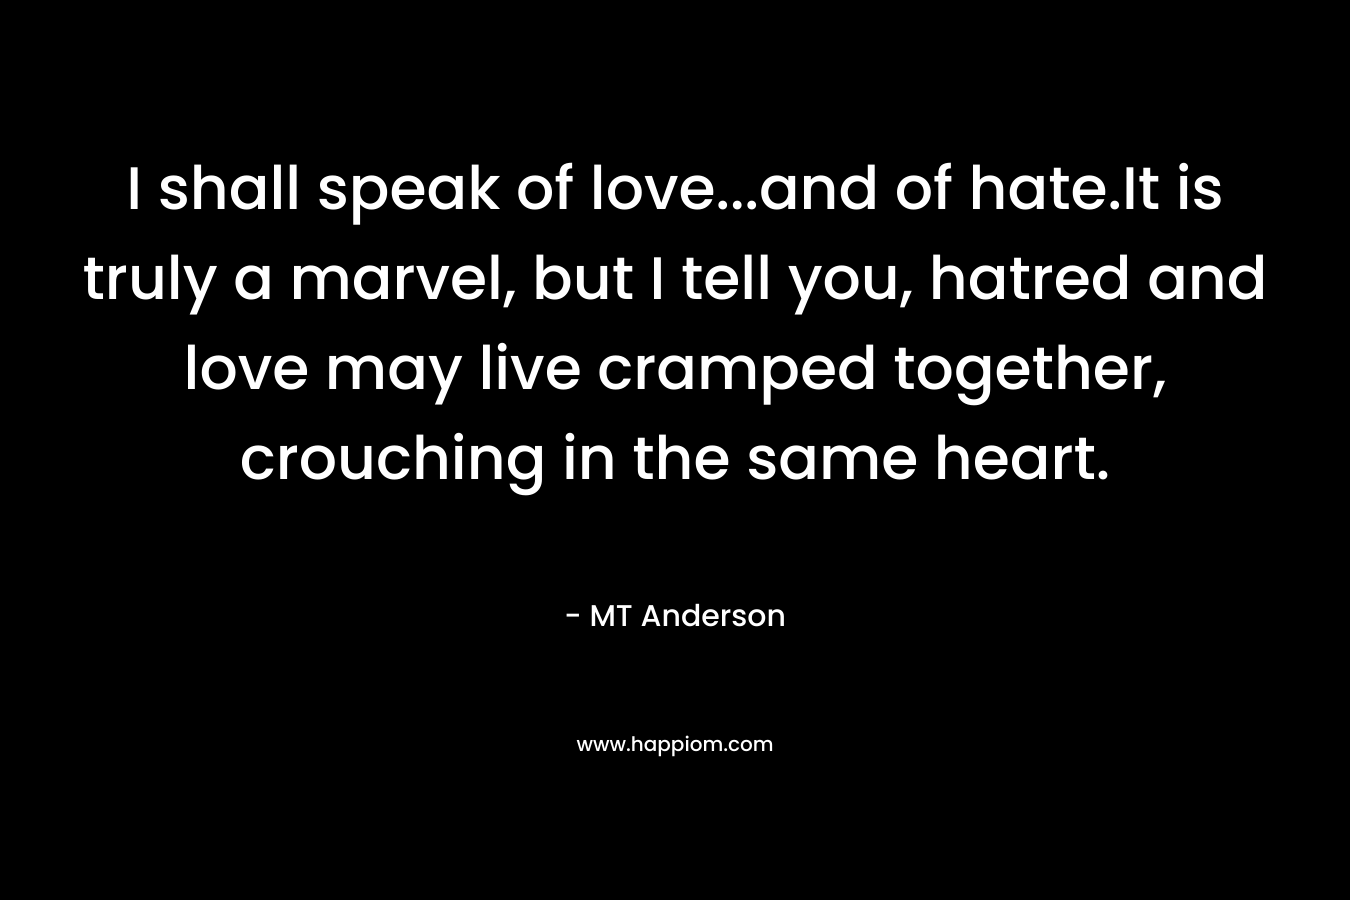 I shall speak of love…and of hate.It is truly a marvel, but I tell you, hatred and love may live cramped together, crouching in the same heart. – MT Anderson